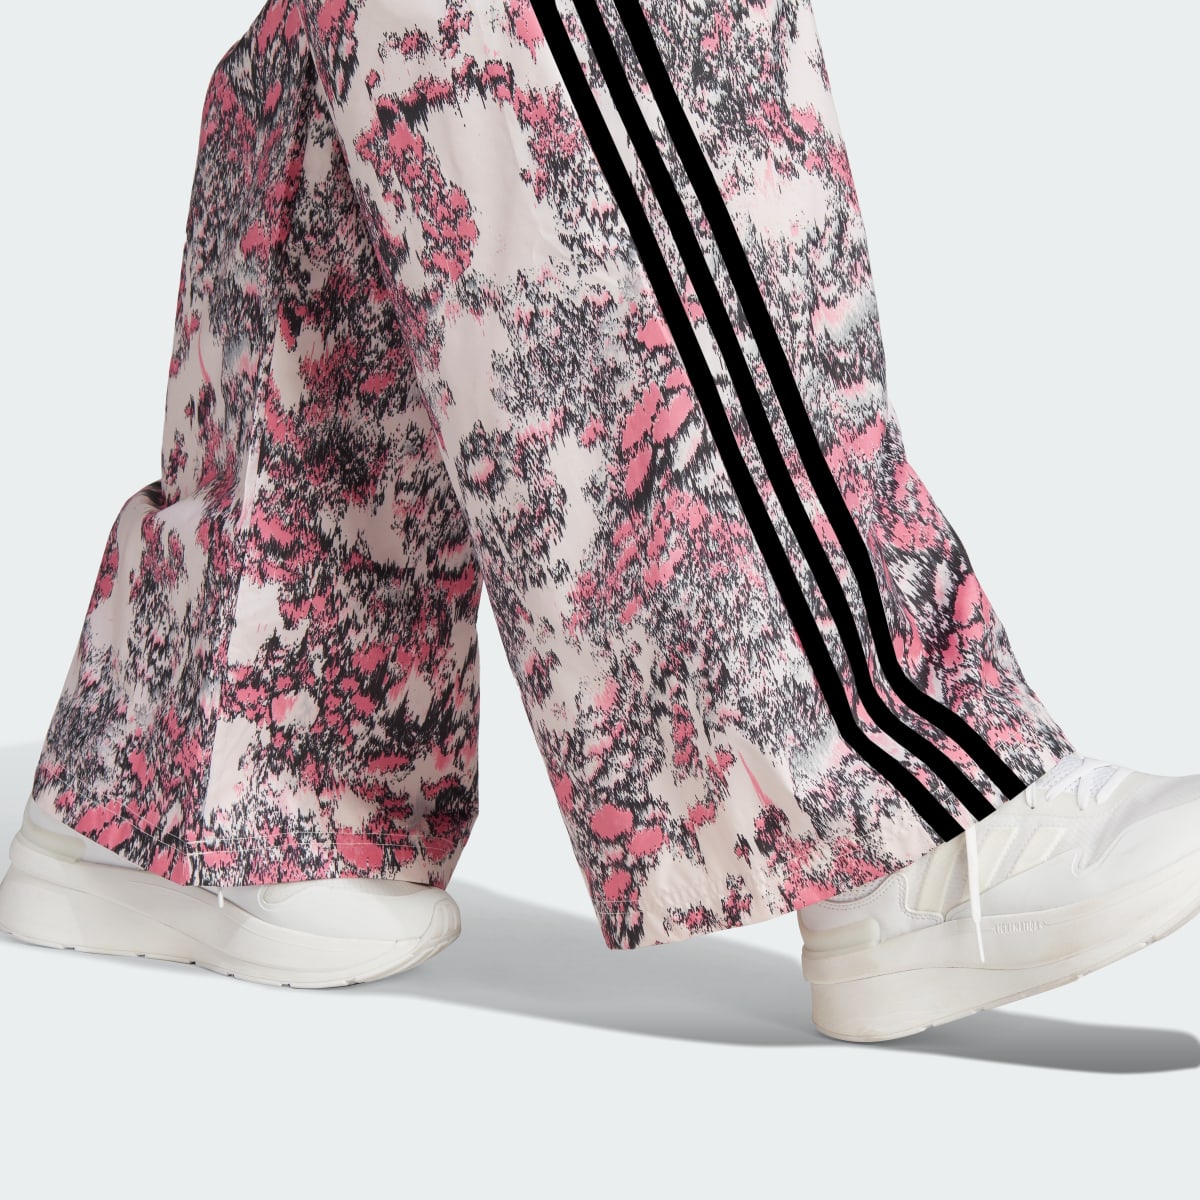 Adidas Future Icons 3-Stripes Woven Tracksuit Bottoms. 6